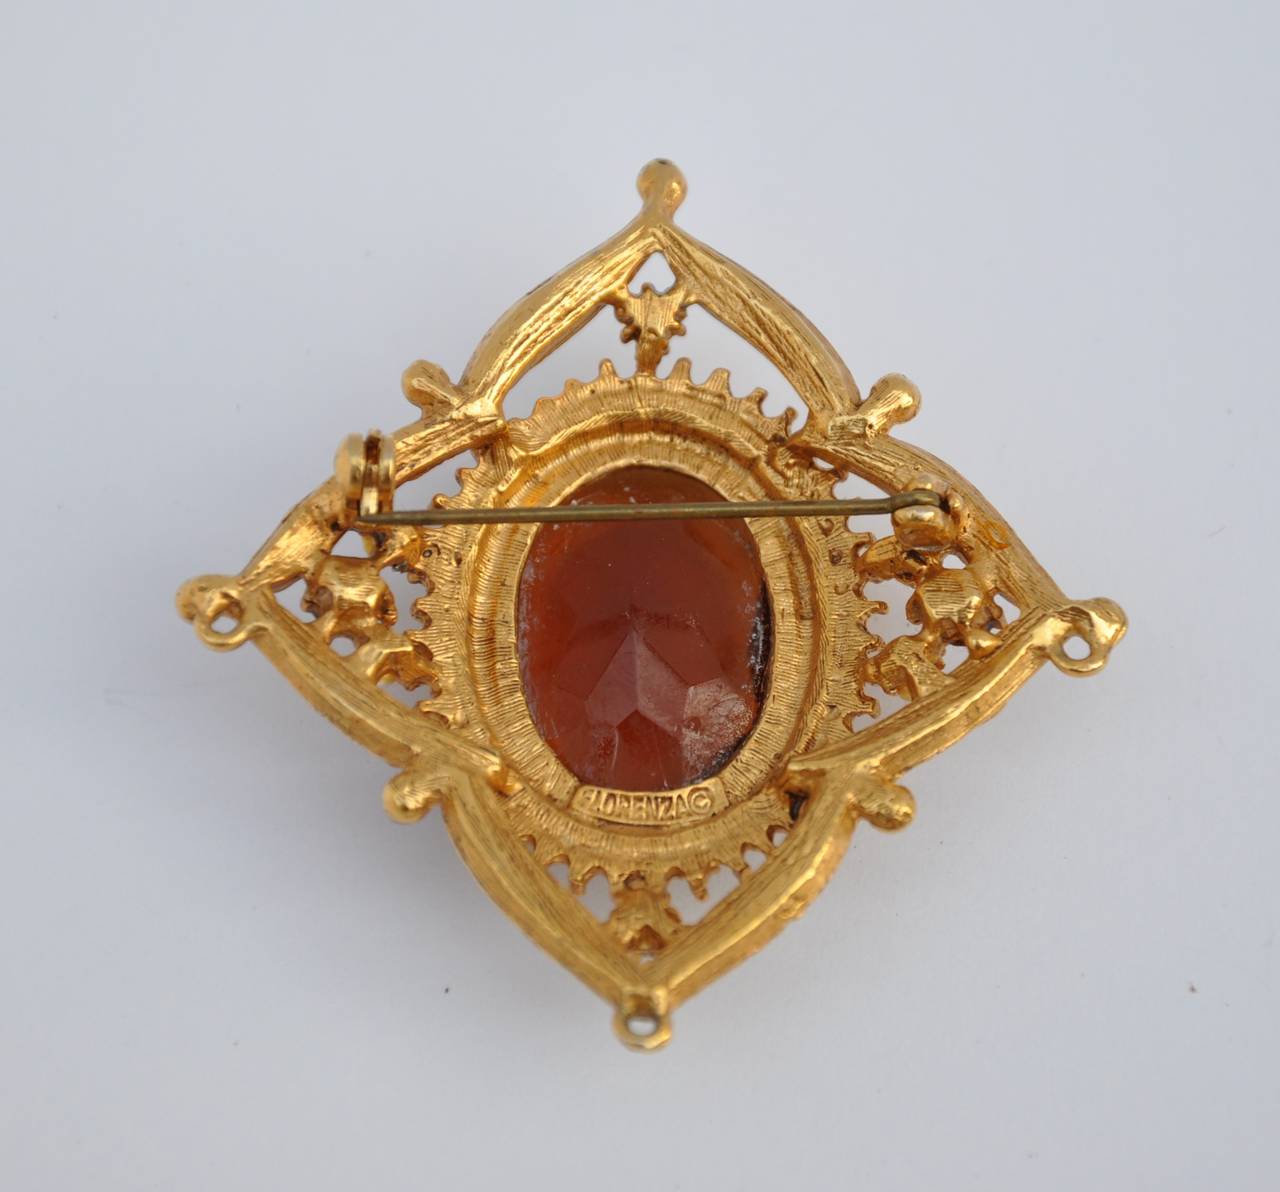 This wonderfully detailed gilded gold filigree vermeil finish brooch is detailed with multi-seed pearls and color resin stones. This wonderful brooch measures 2 1/8" in height, 2 1/8" in width and 1/2" in depth.